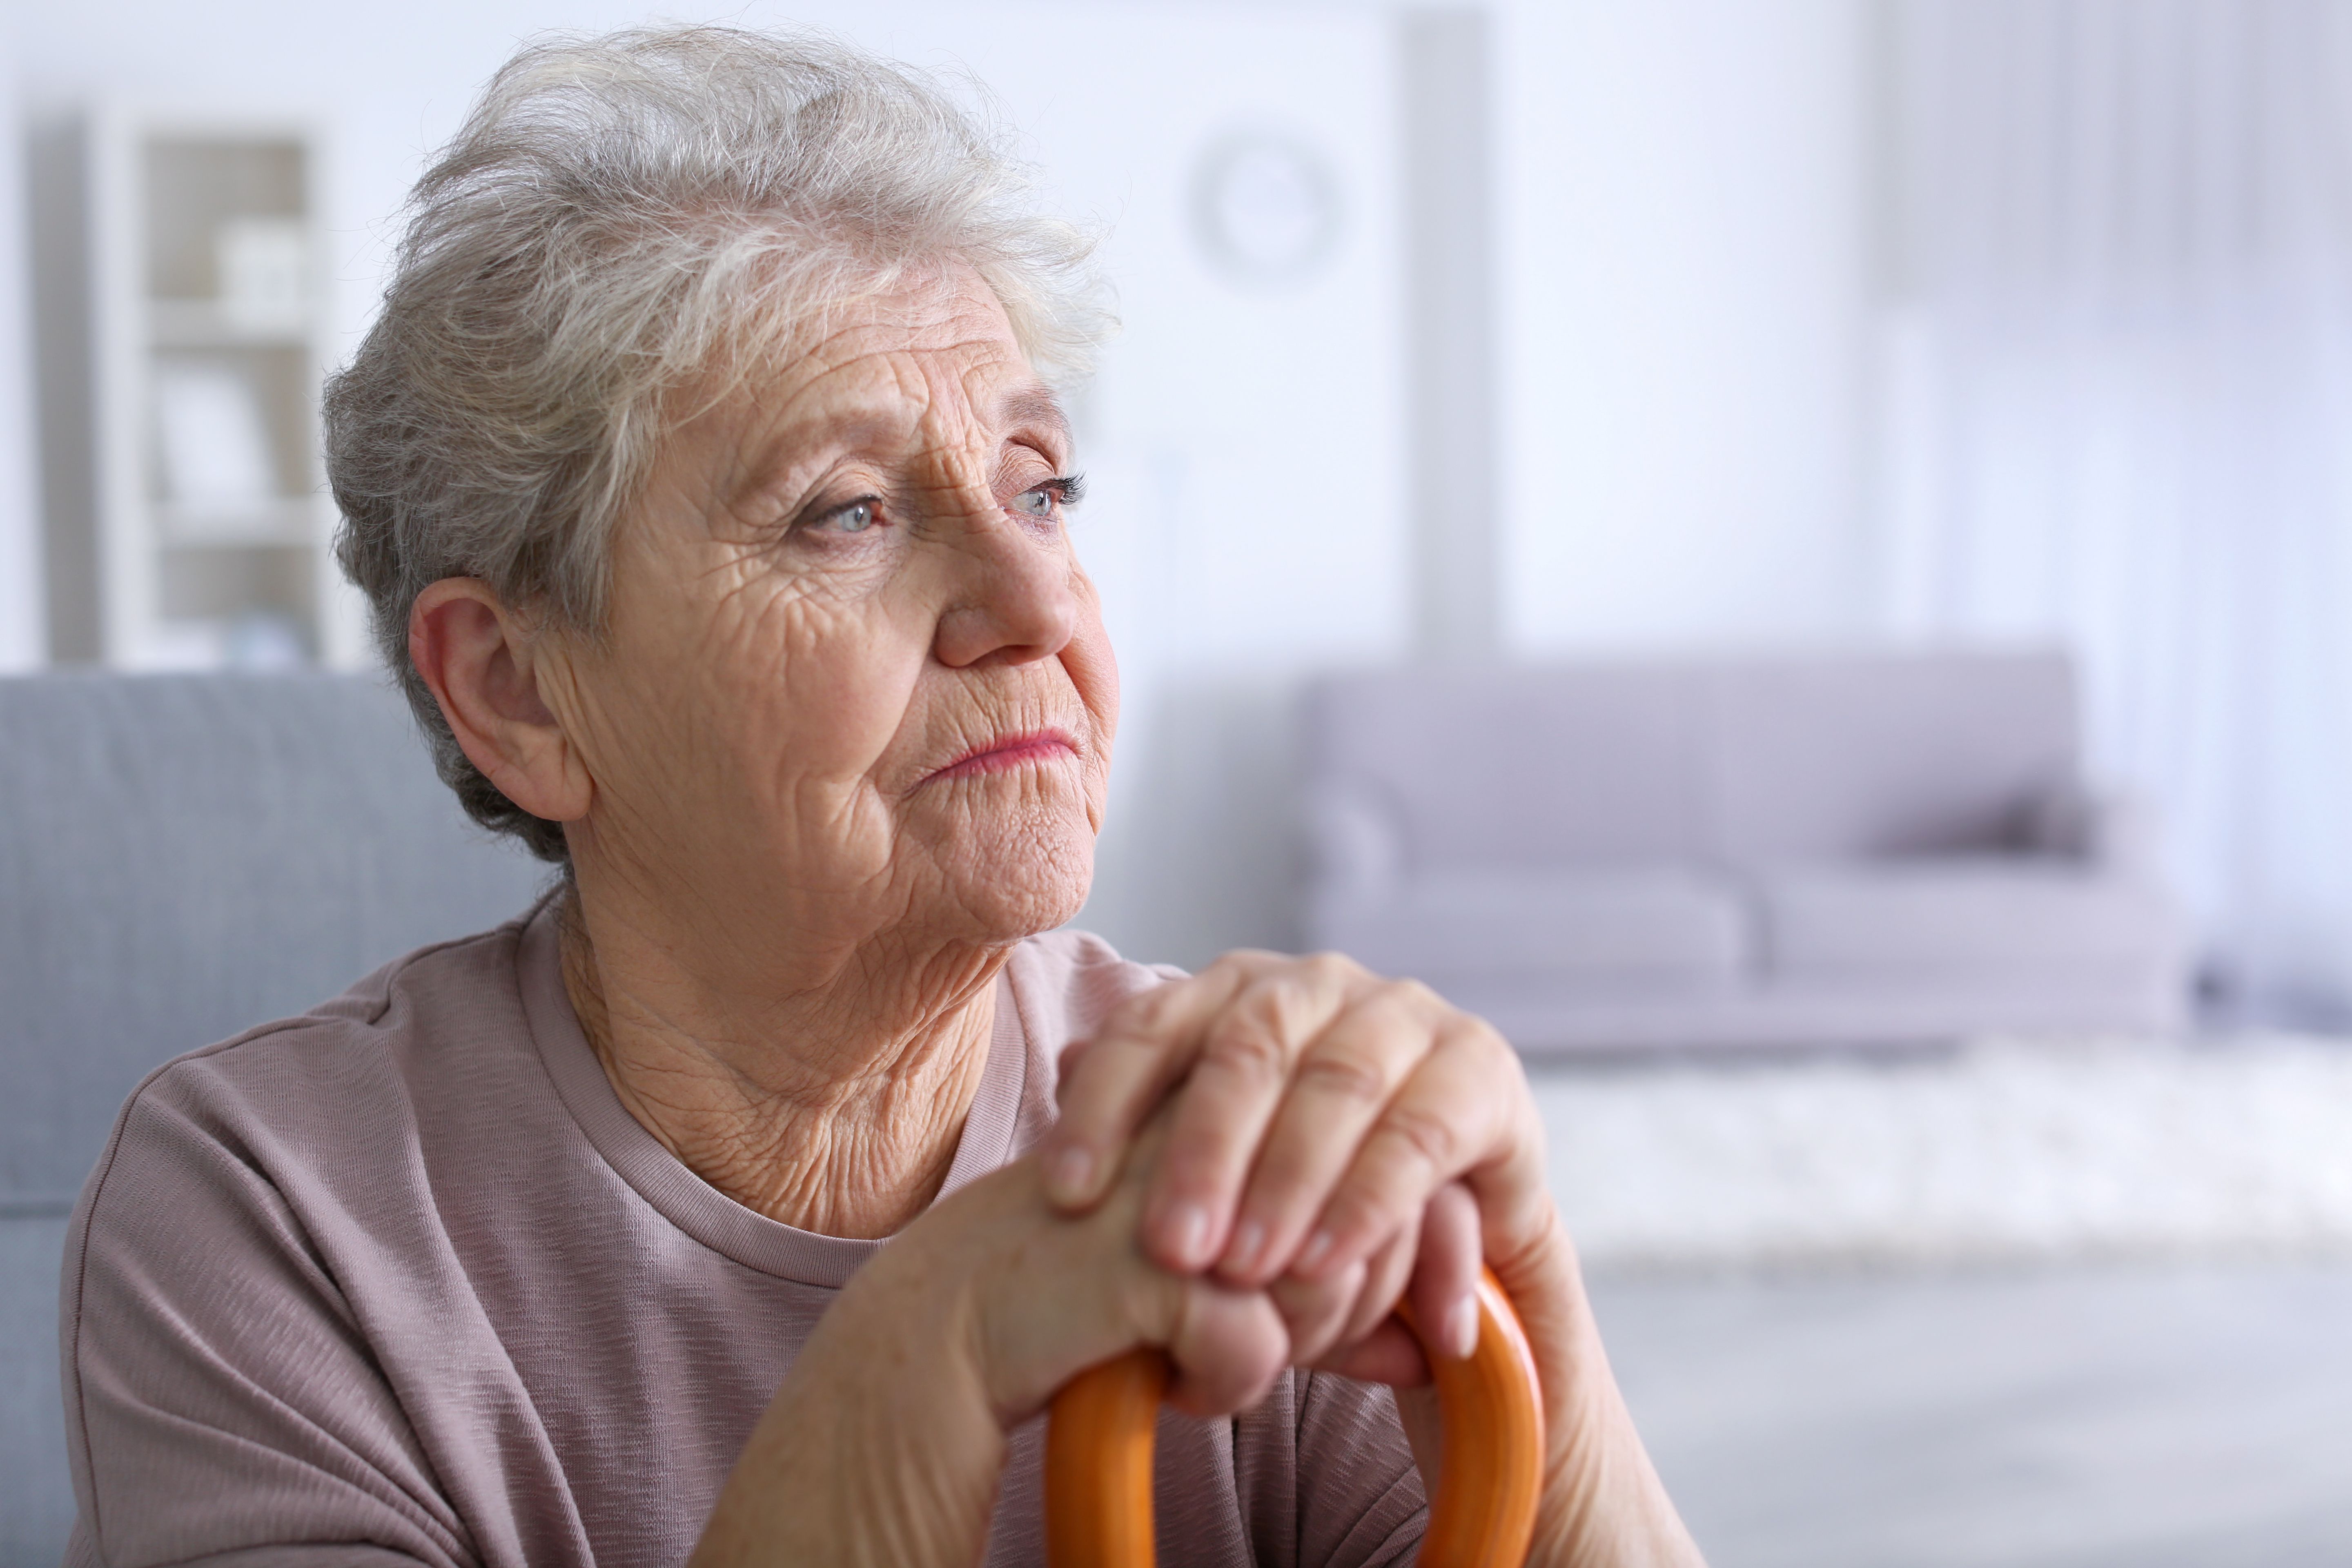 An elderly woman looks disappointed. | Source: Shutterstock